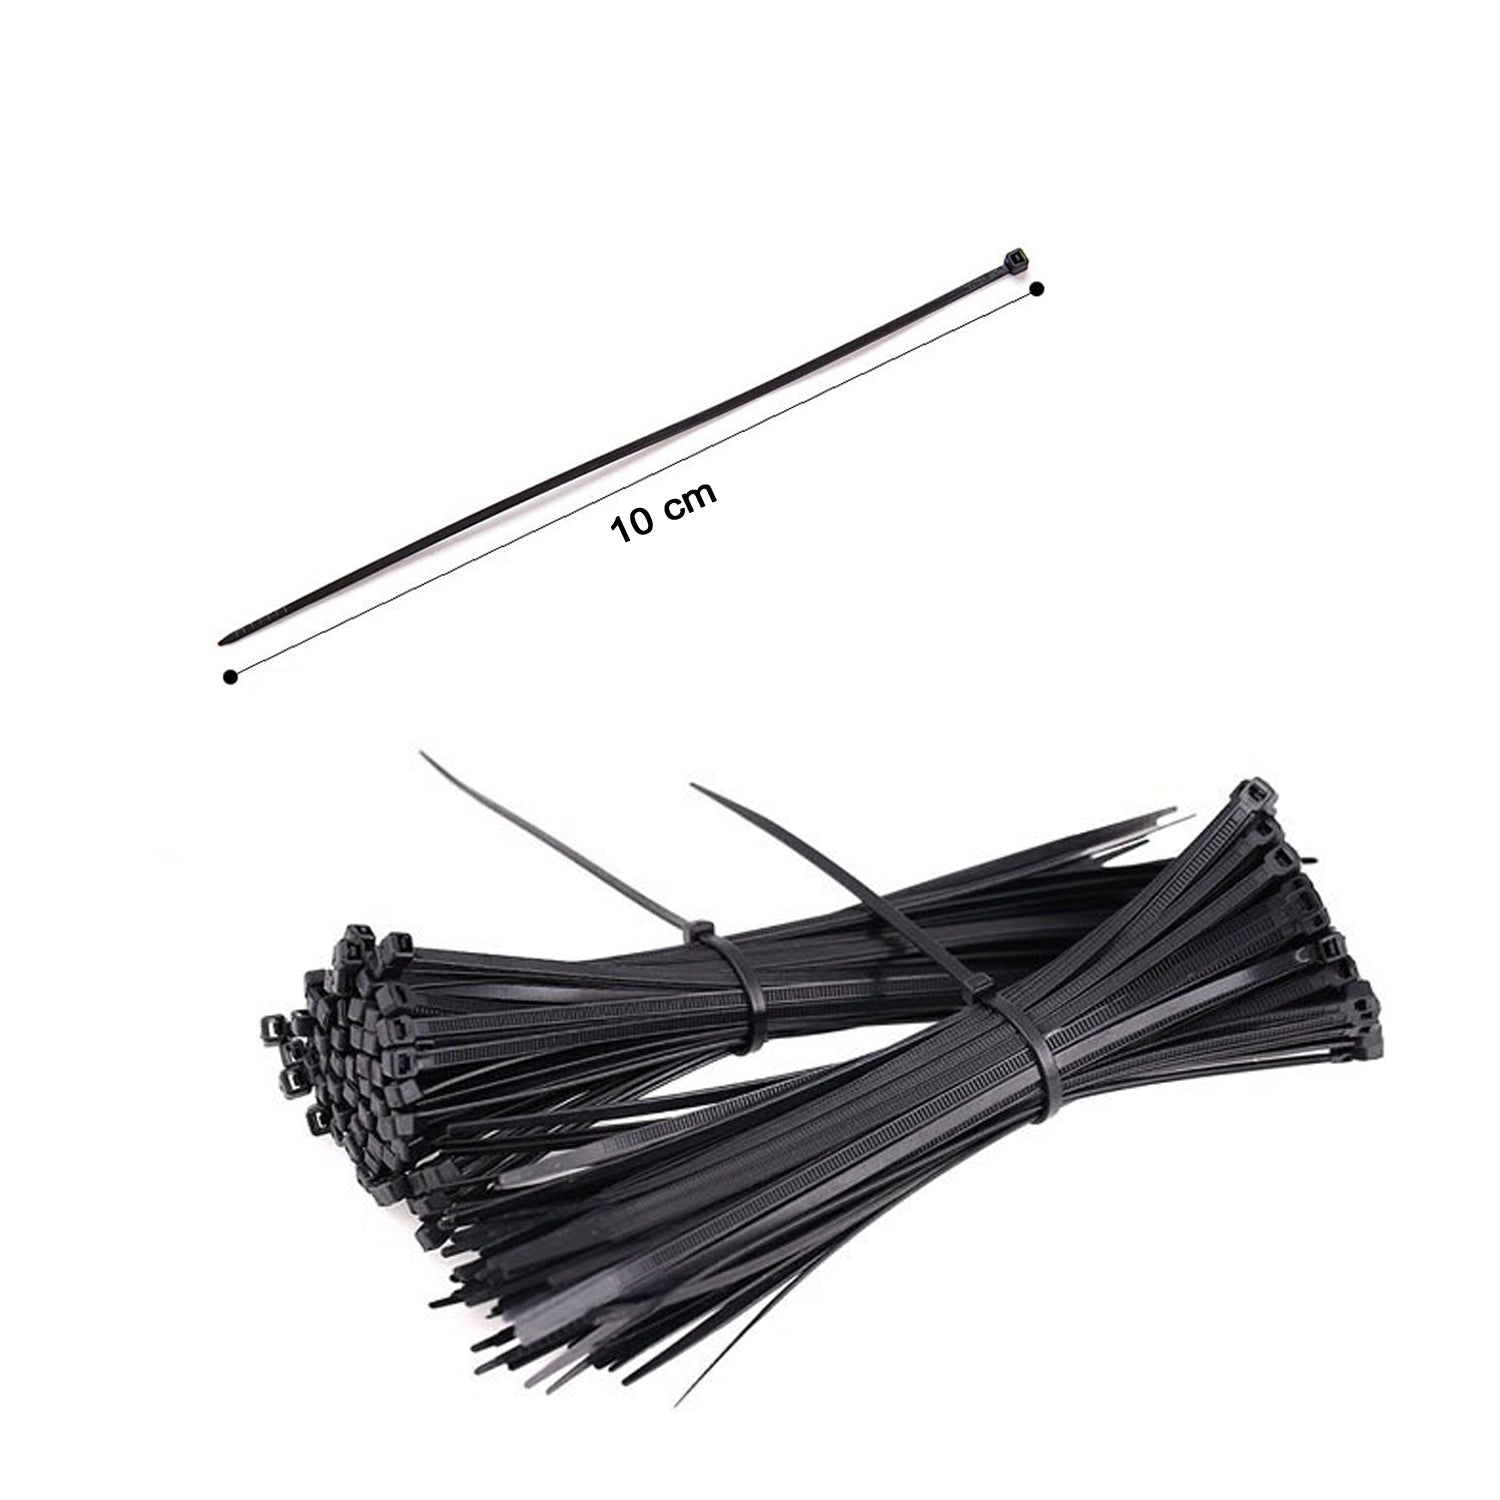 9019 100 Pc Cable Zip Ties used in all kinds of wires to make them tied and knotted etc. 